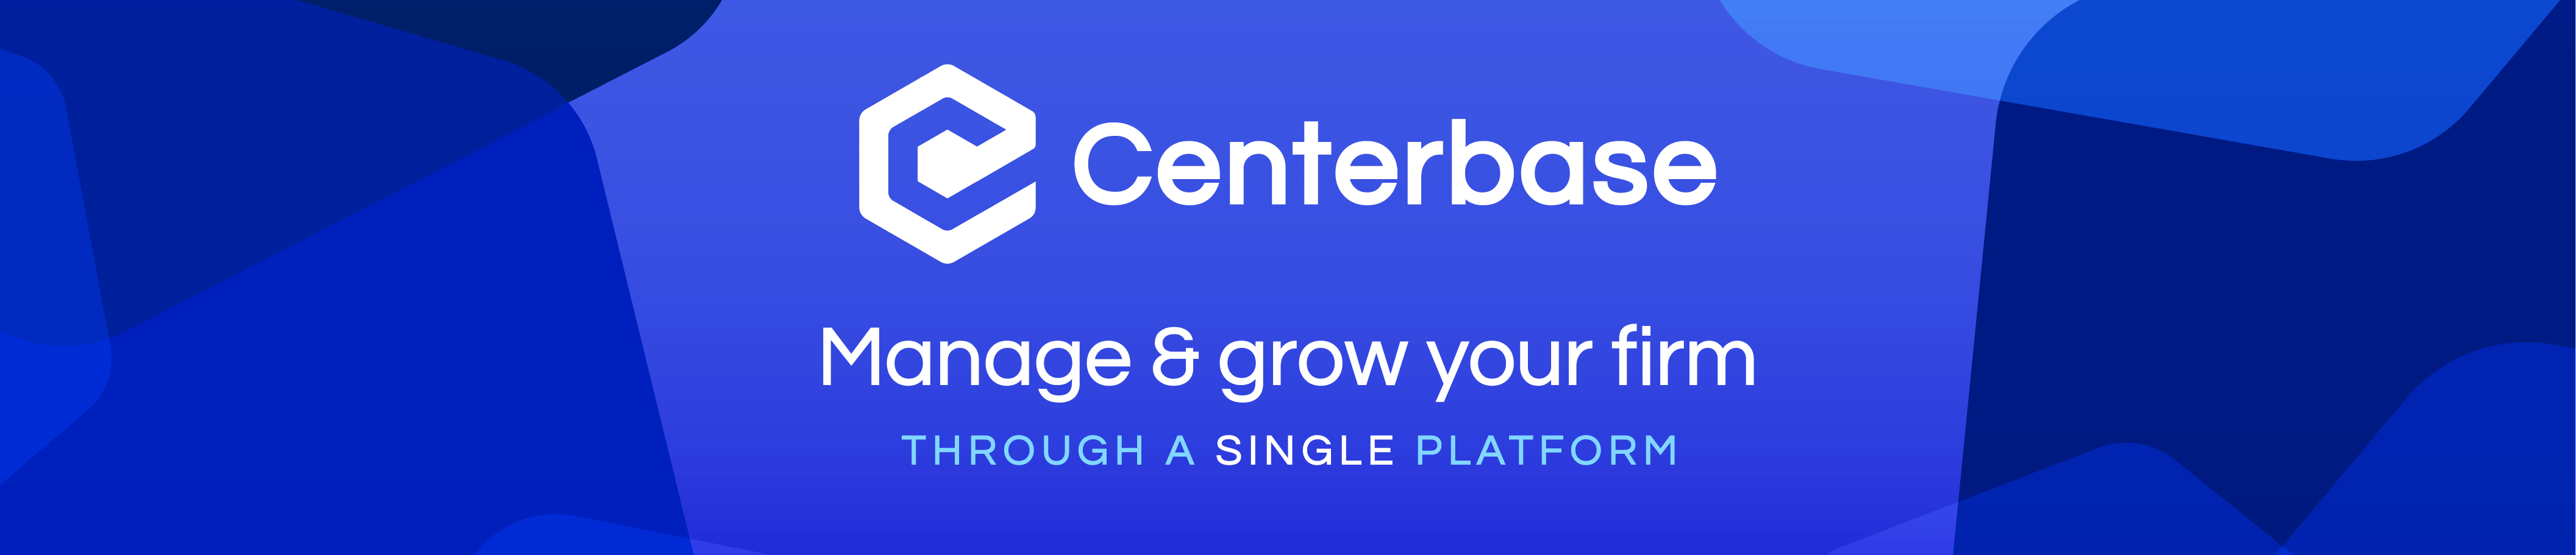 Centerbase Centerbase-- Manage and grow your firm through a single platform